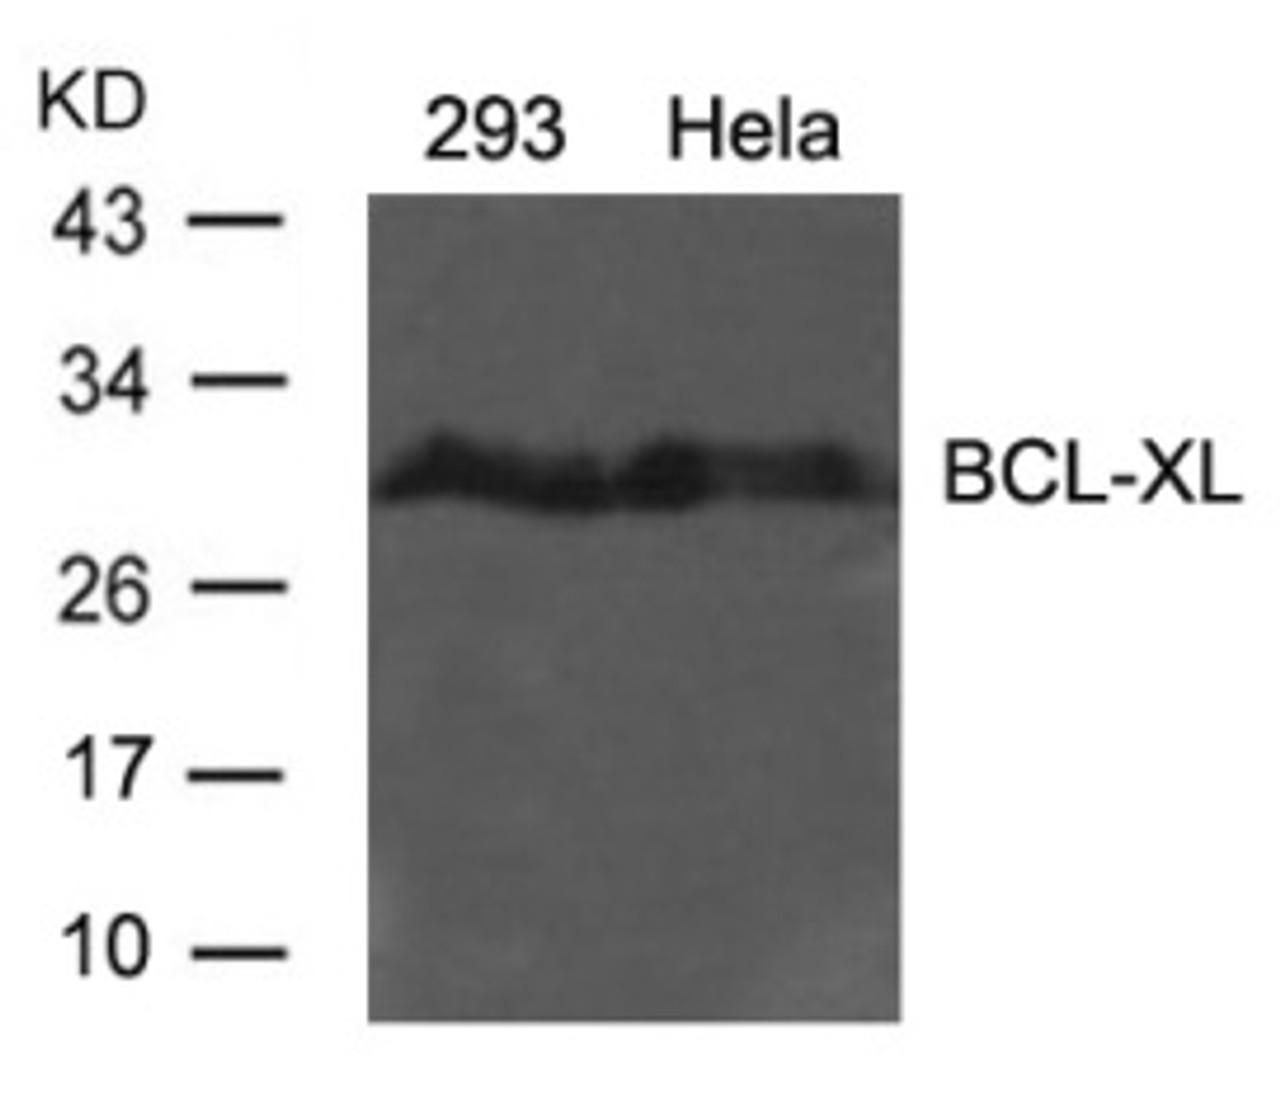 Western blot analysis of lysed extracts from 293 and HeLa cells using BCL-XL (Ab-62) .